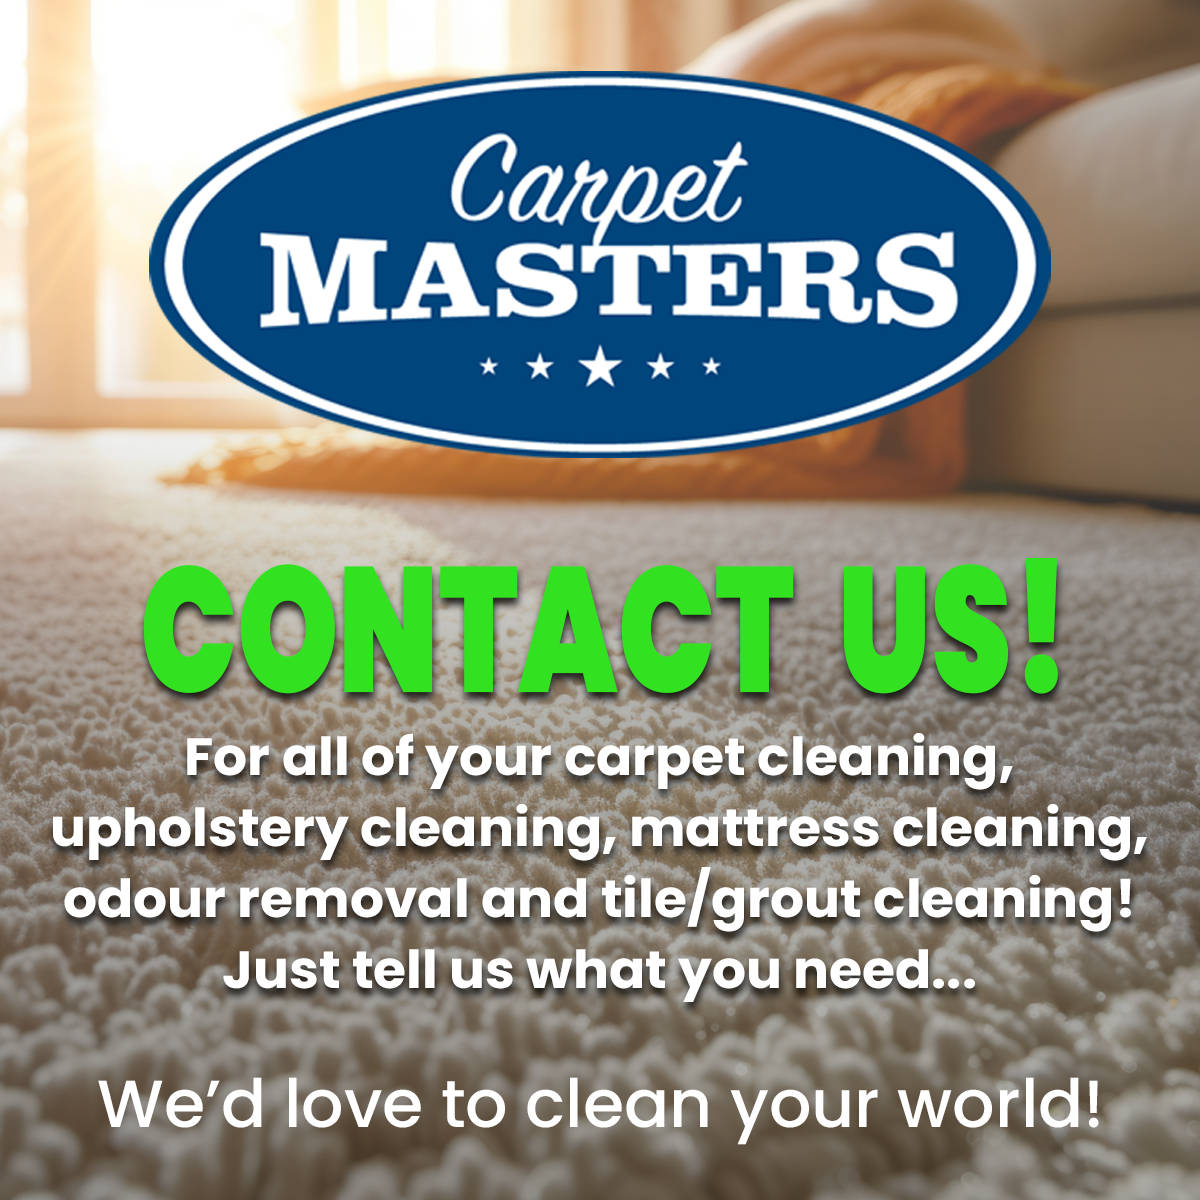 Contact Us for all of your carpet cleaning, upholstery cleaning, mattress cleaning, odour removal and tile / grout cleaning! Just tell us what you need...